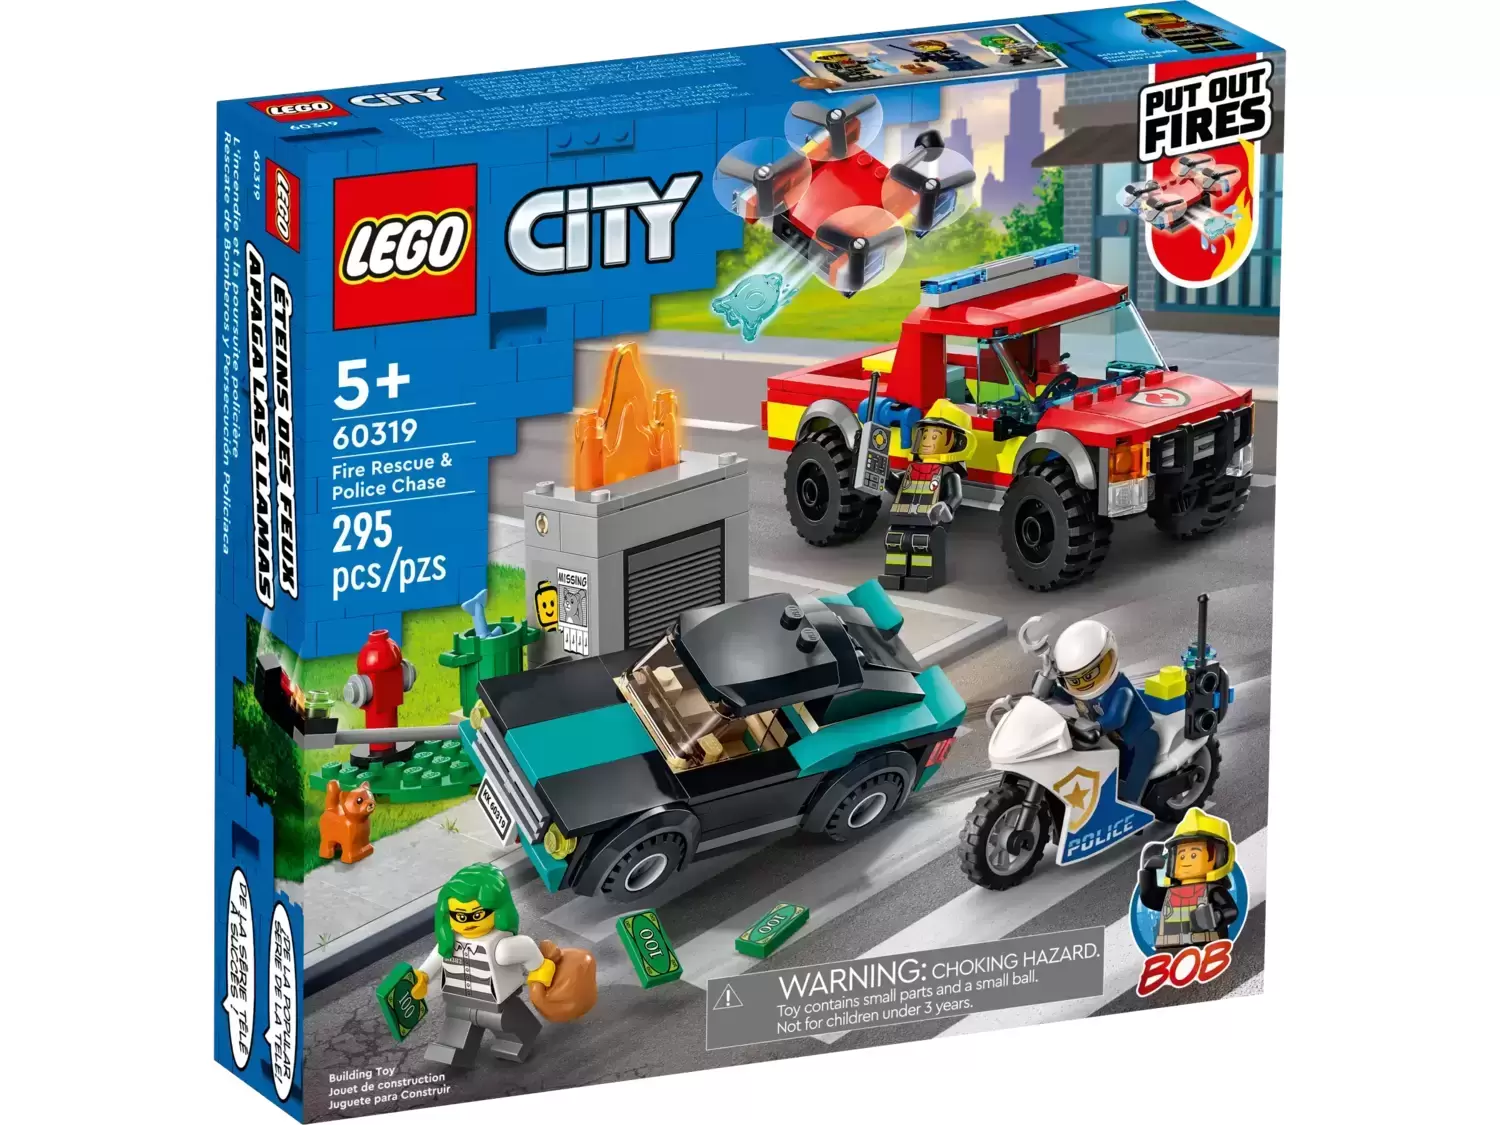 LEGO CITY - Fire Rescue & Police Chase